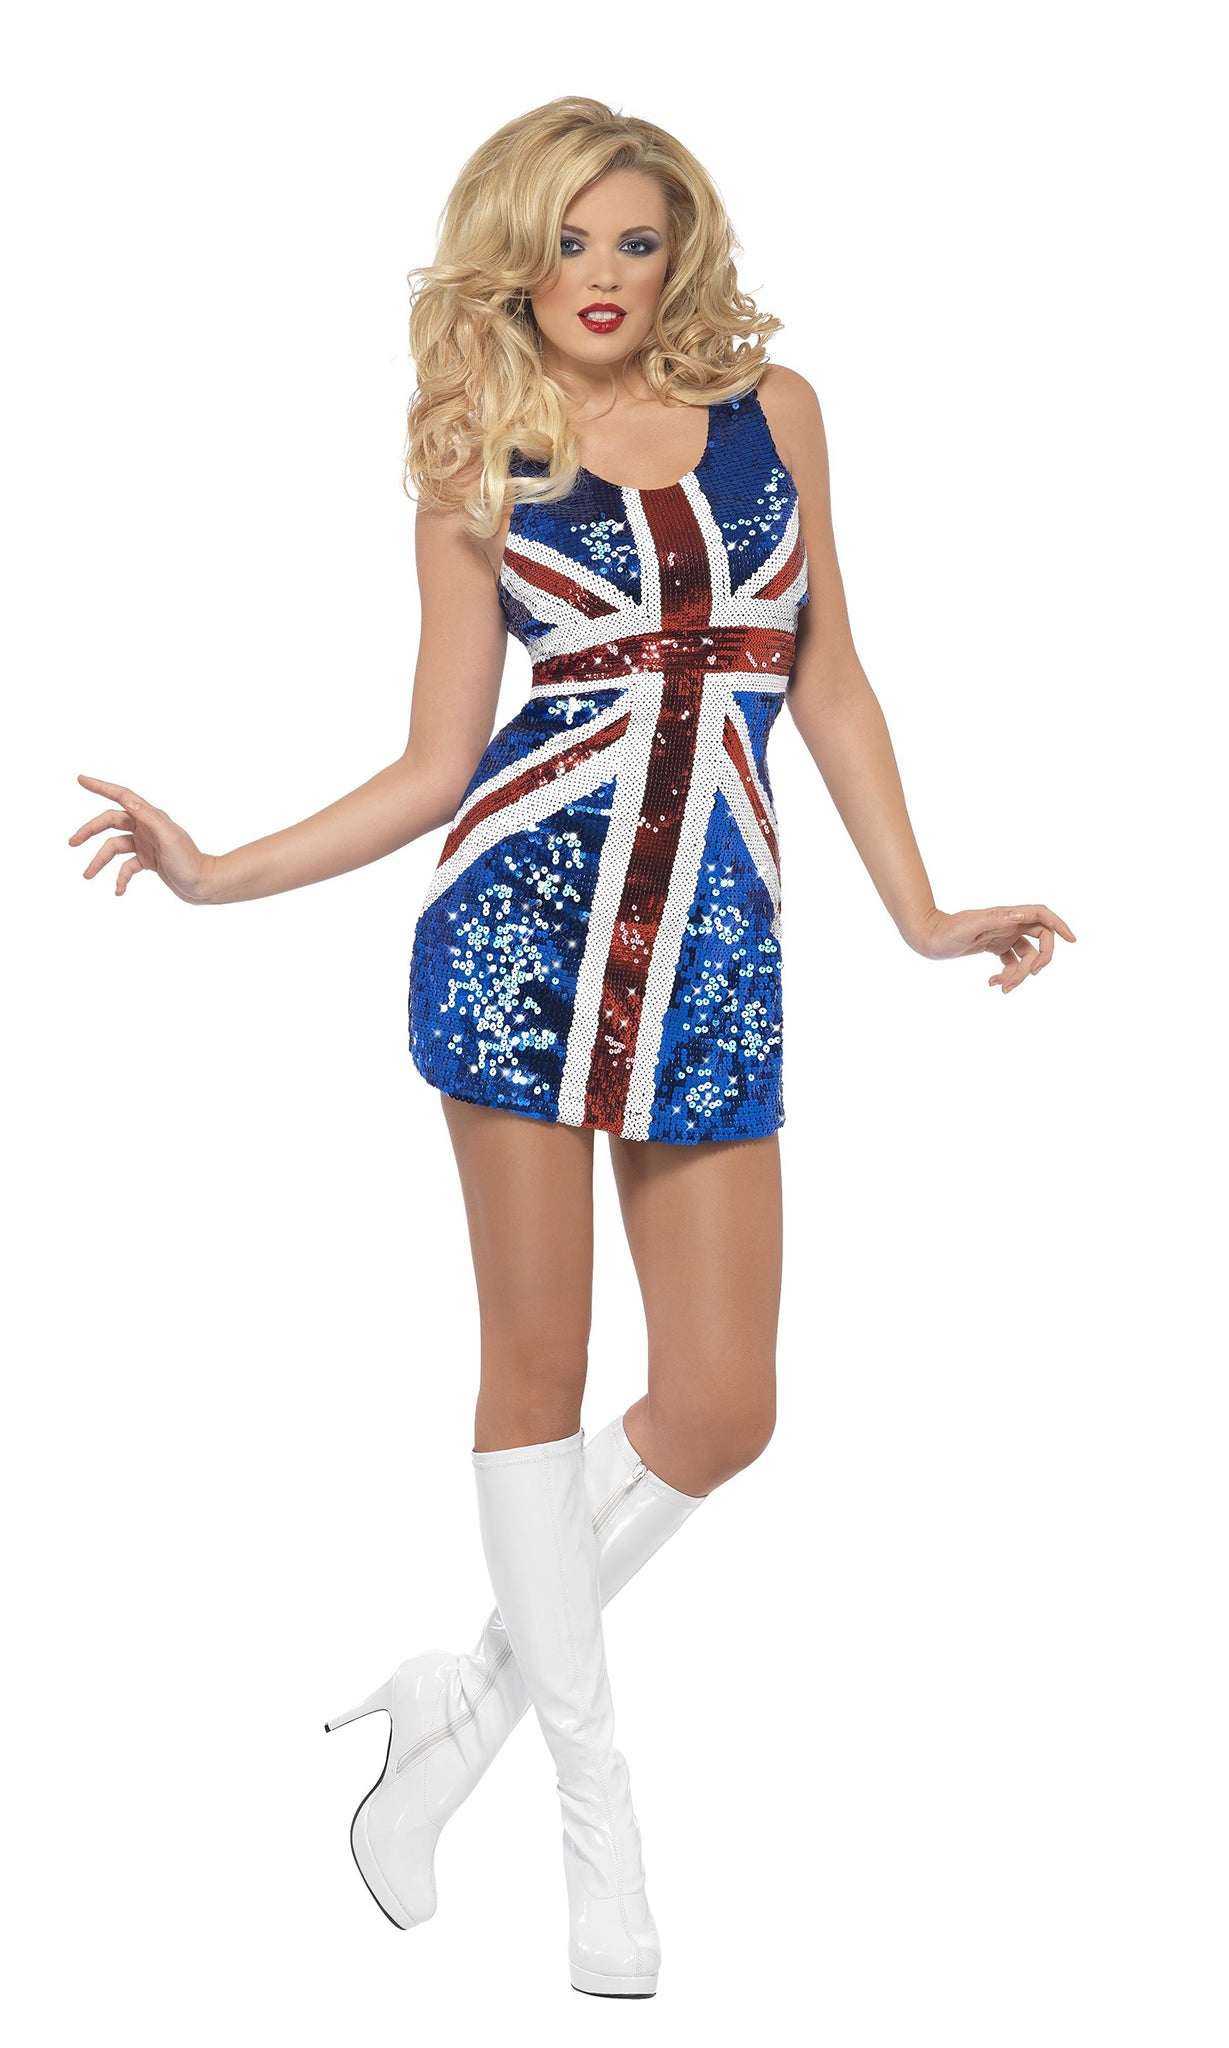 Alternate view of glittery short blue and red Union Jack dress